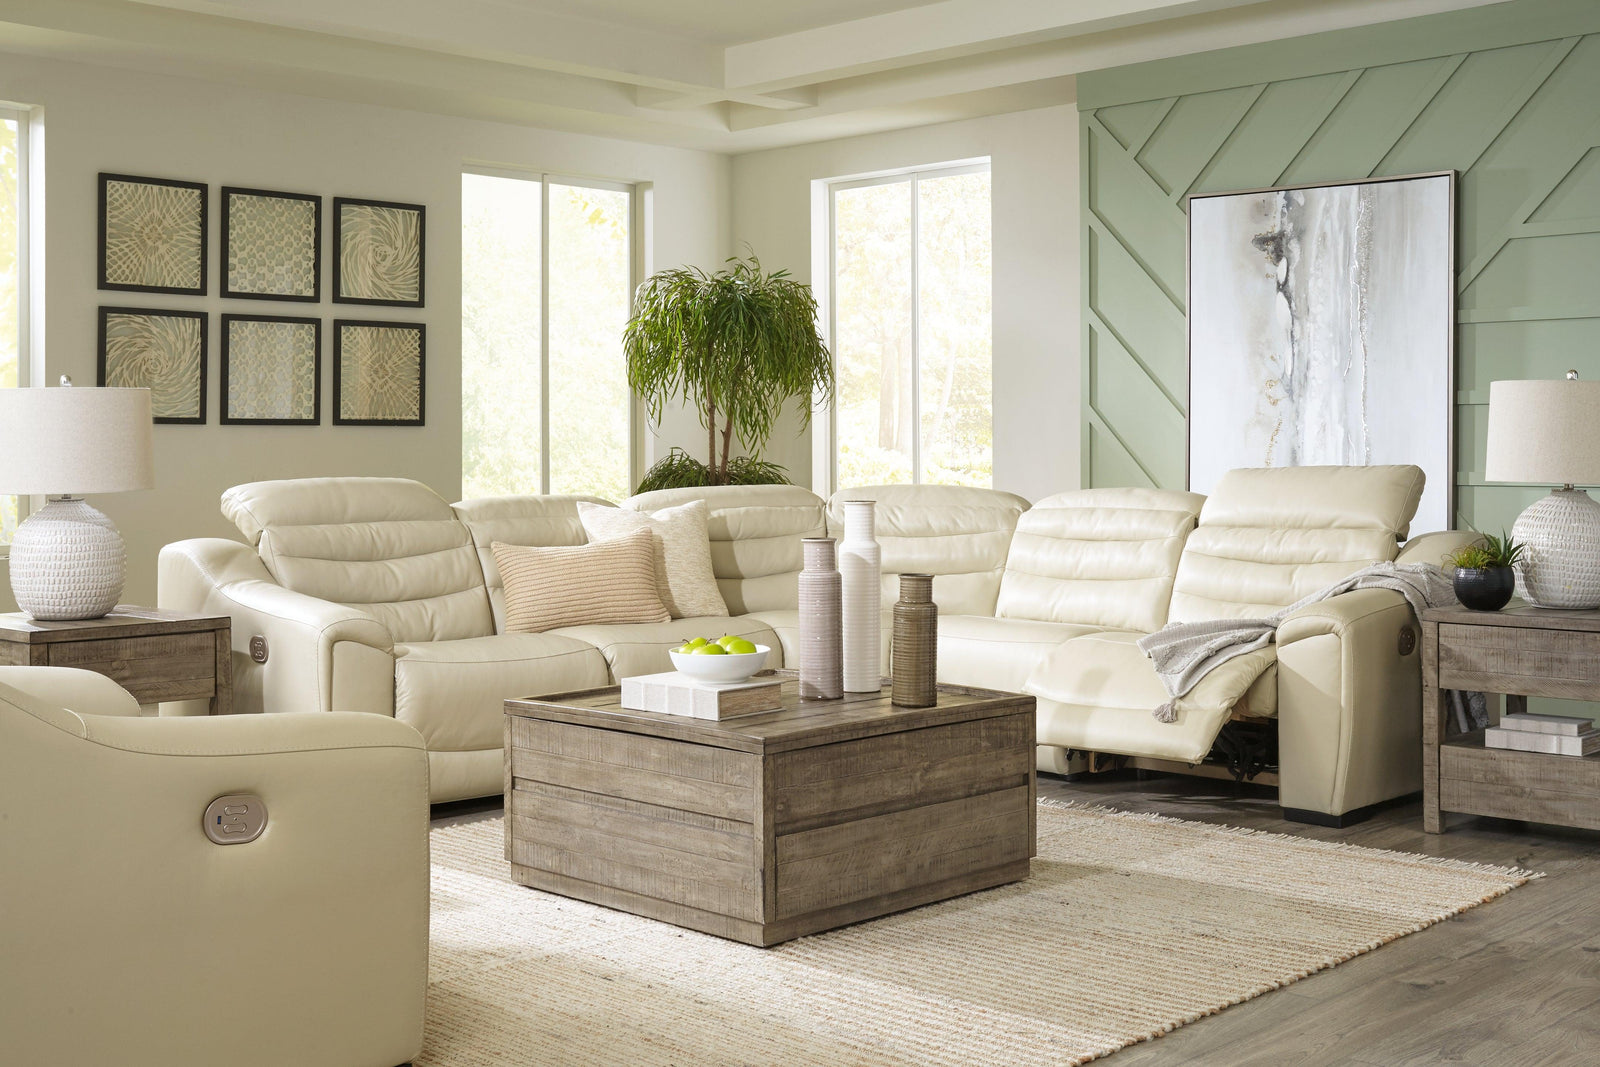 Center Cream Line 5-Piece Sectional With Recliner - Ella Furniture